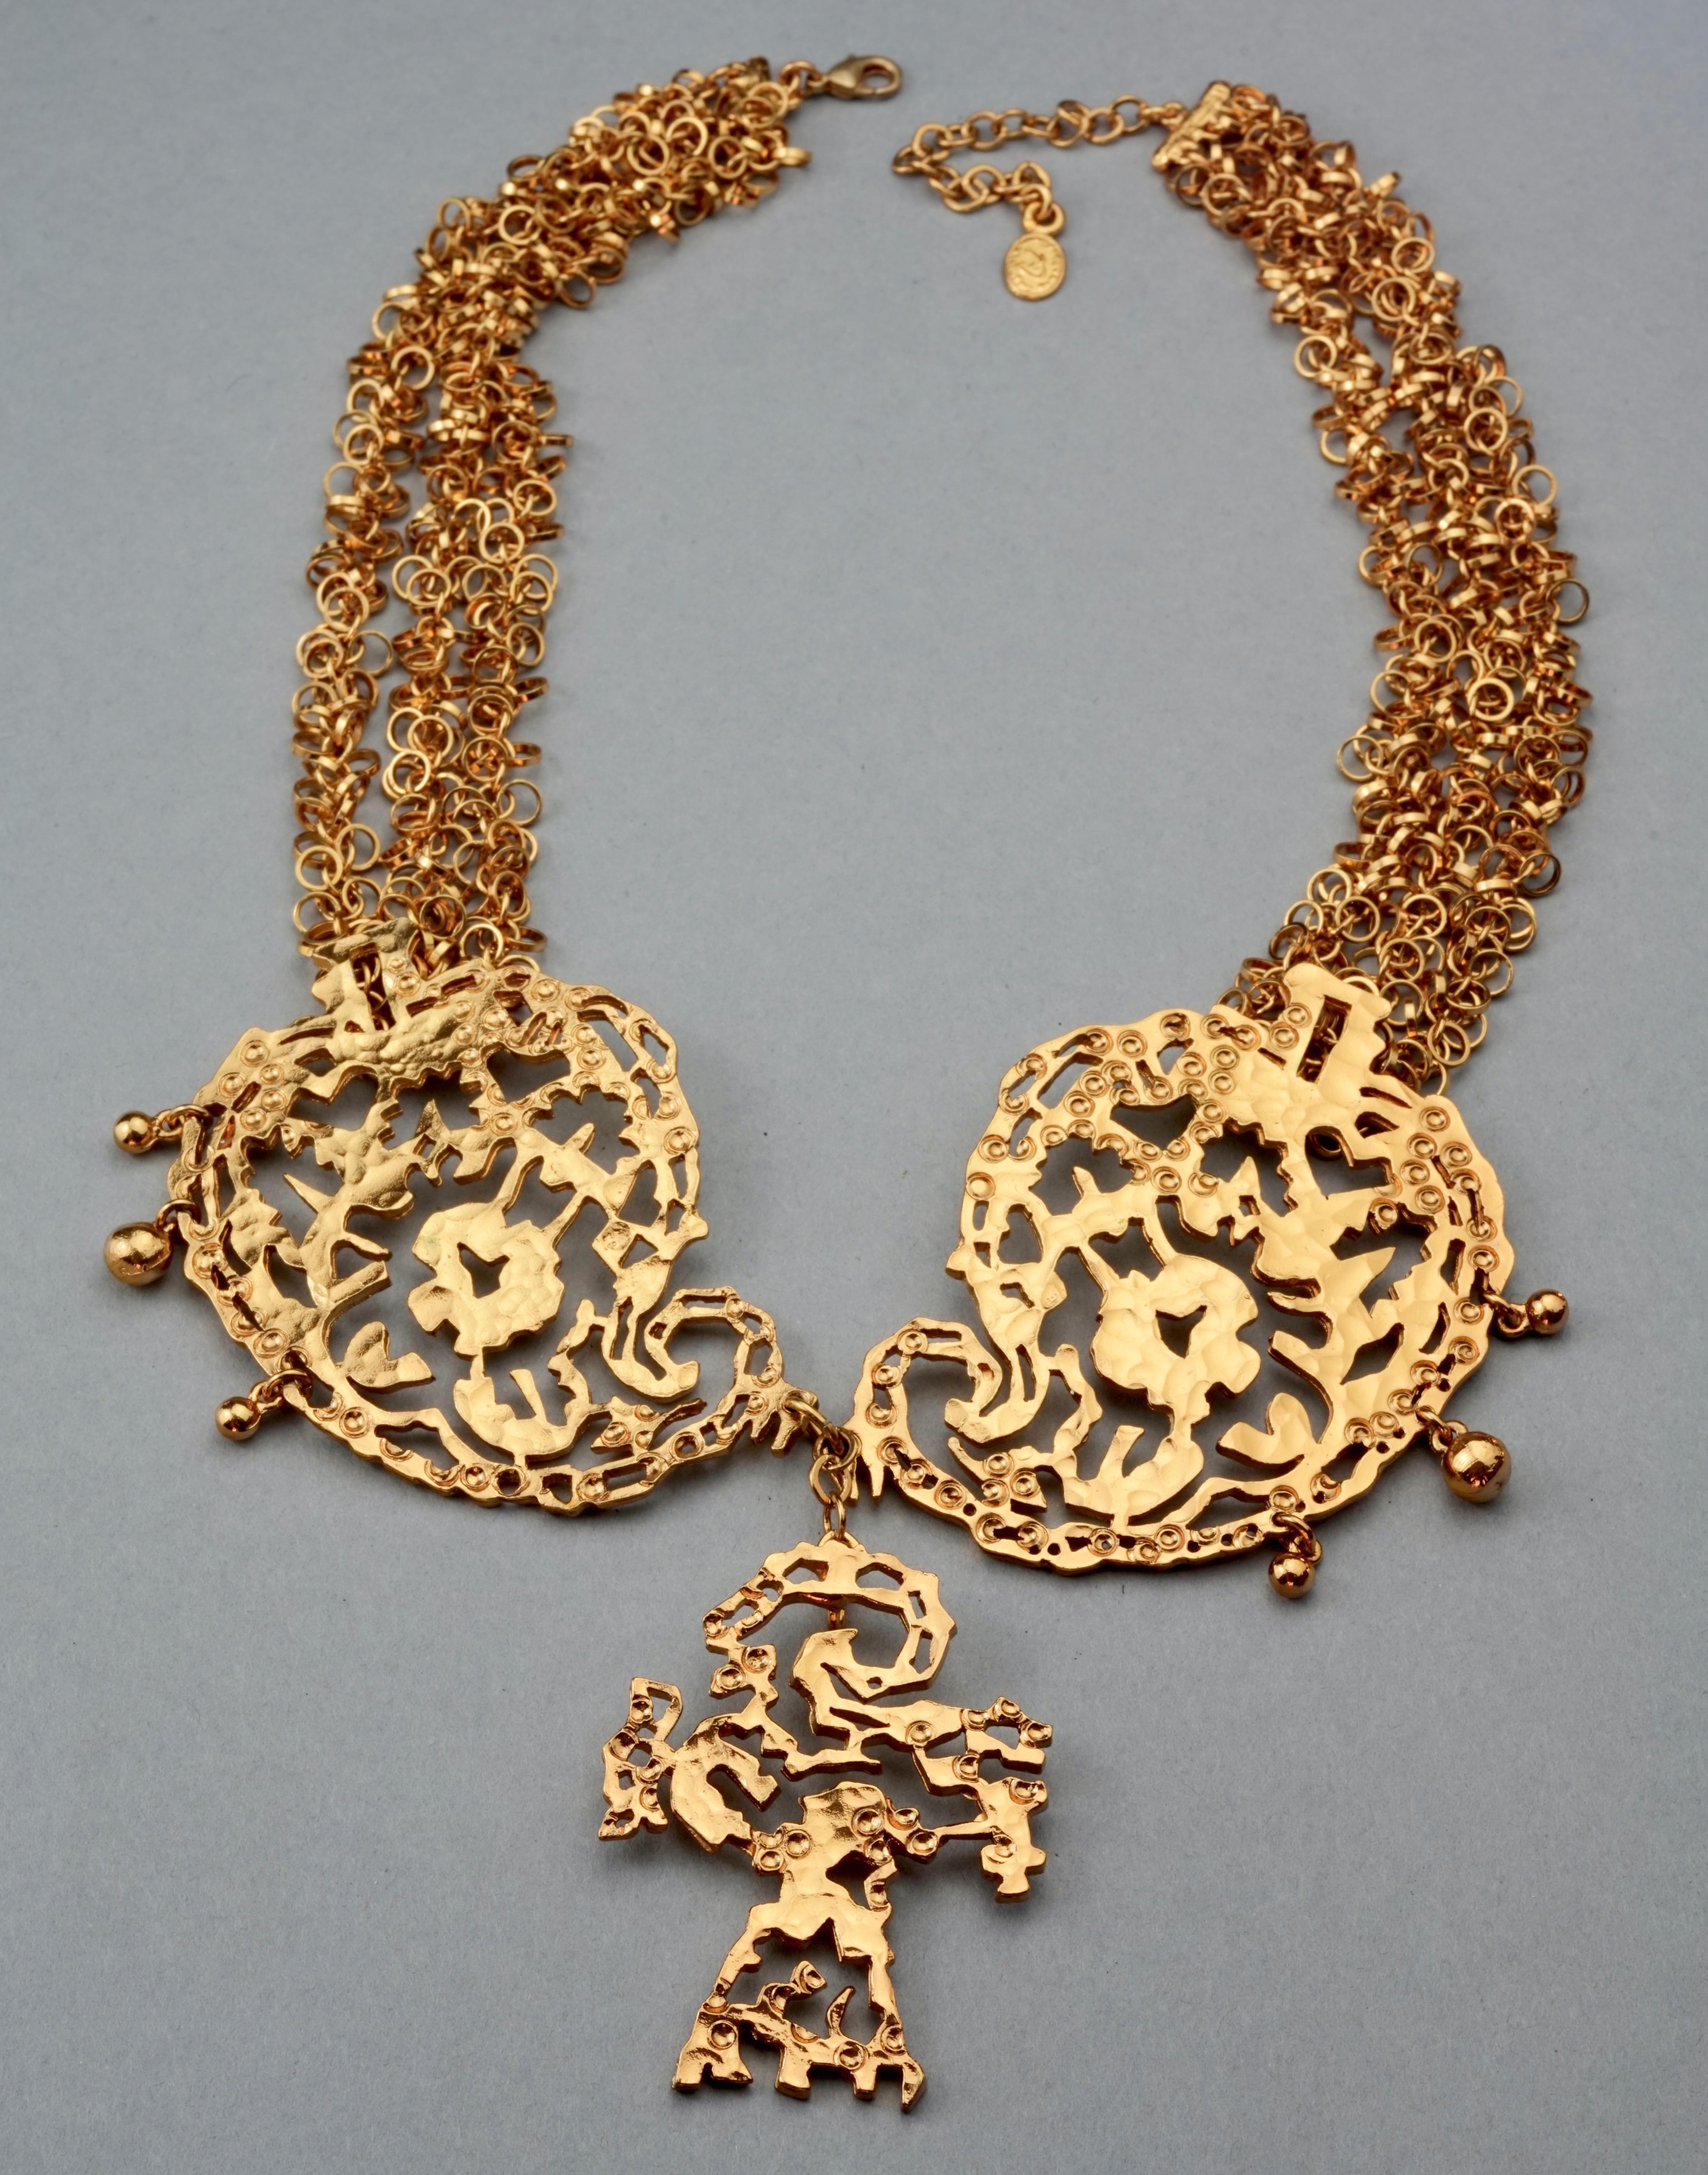 Vintage CHRISTIAN LACROIX Opulent Filigree Multi Chain Necklace In Excellent Condition For Sale In Kingersheim, Alsace